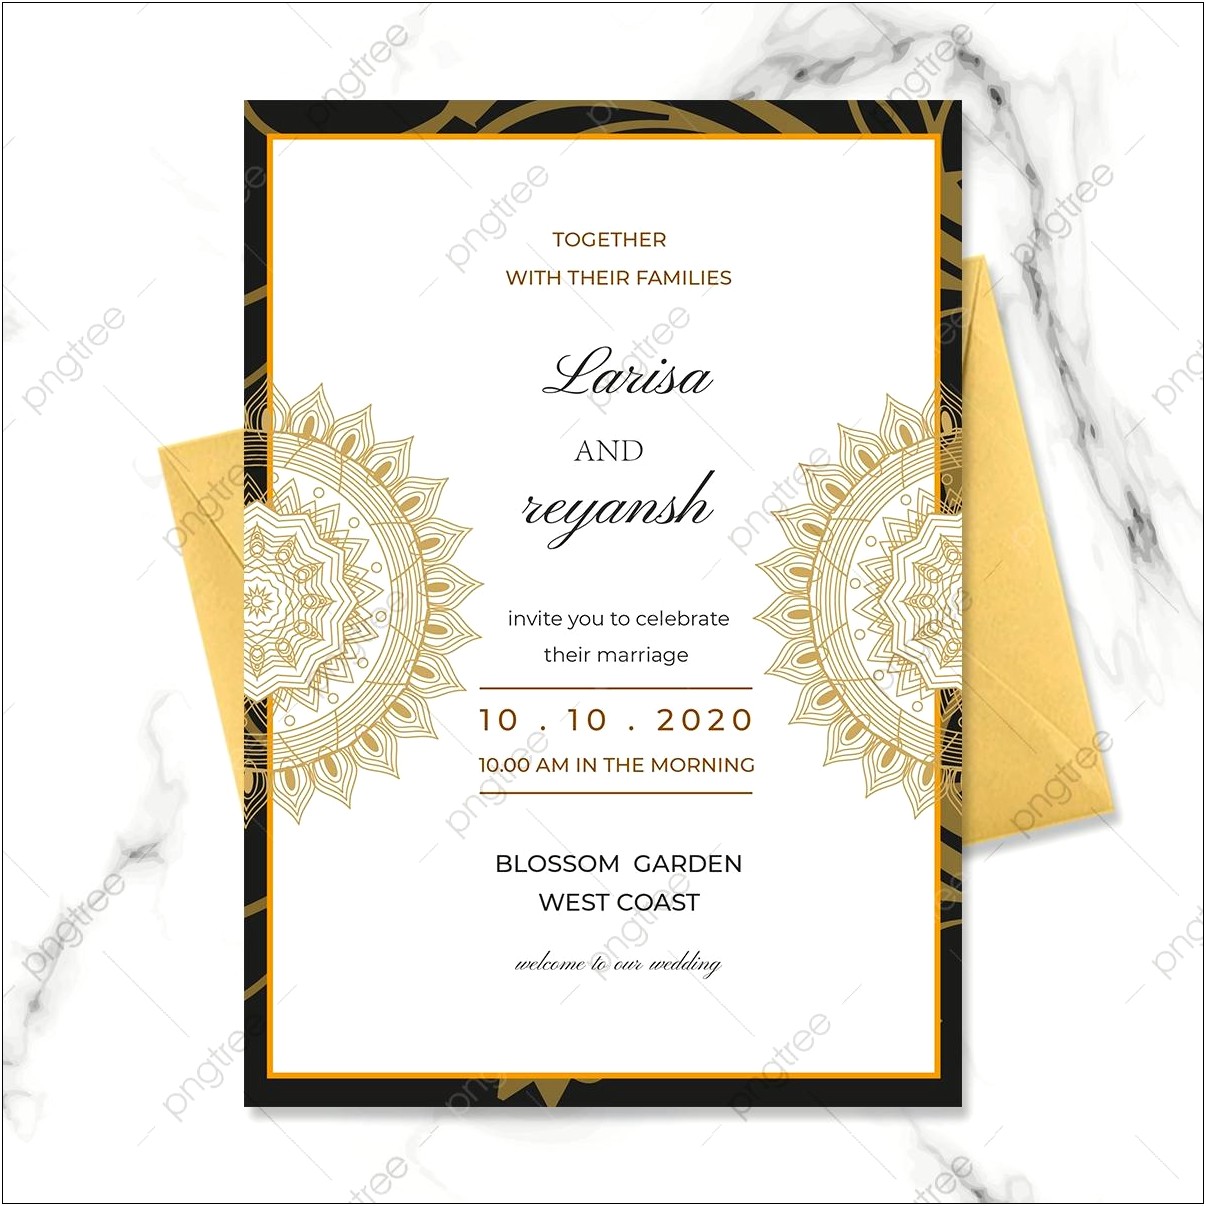 Indian Wedding Card Design Psd Template Free Download